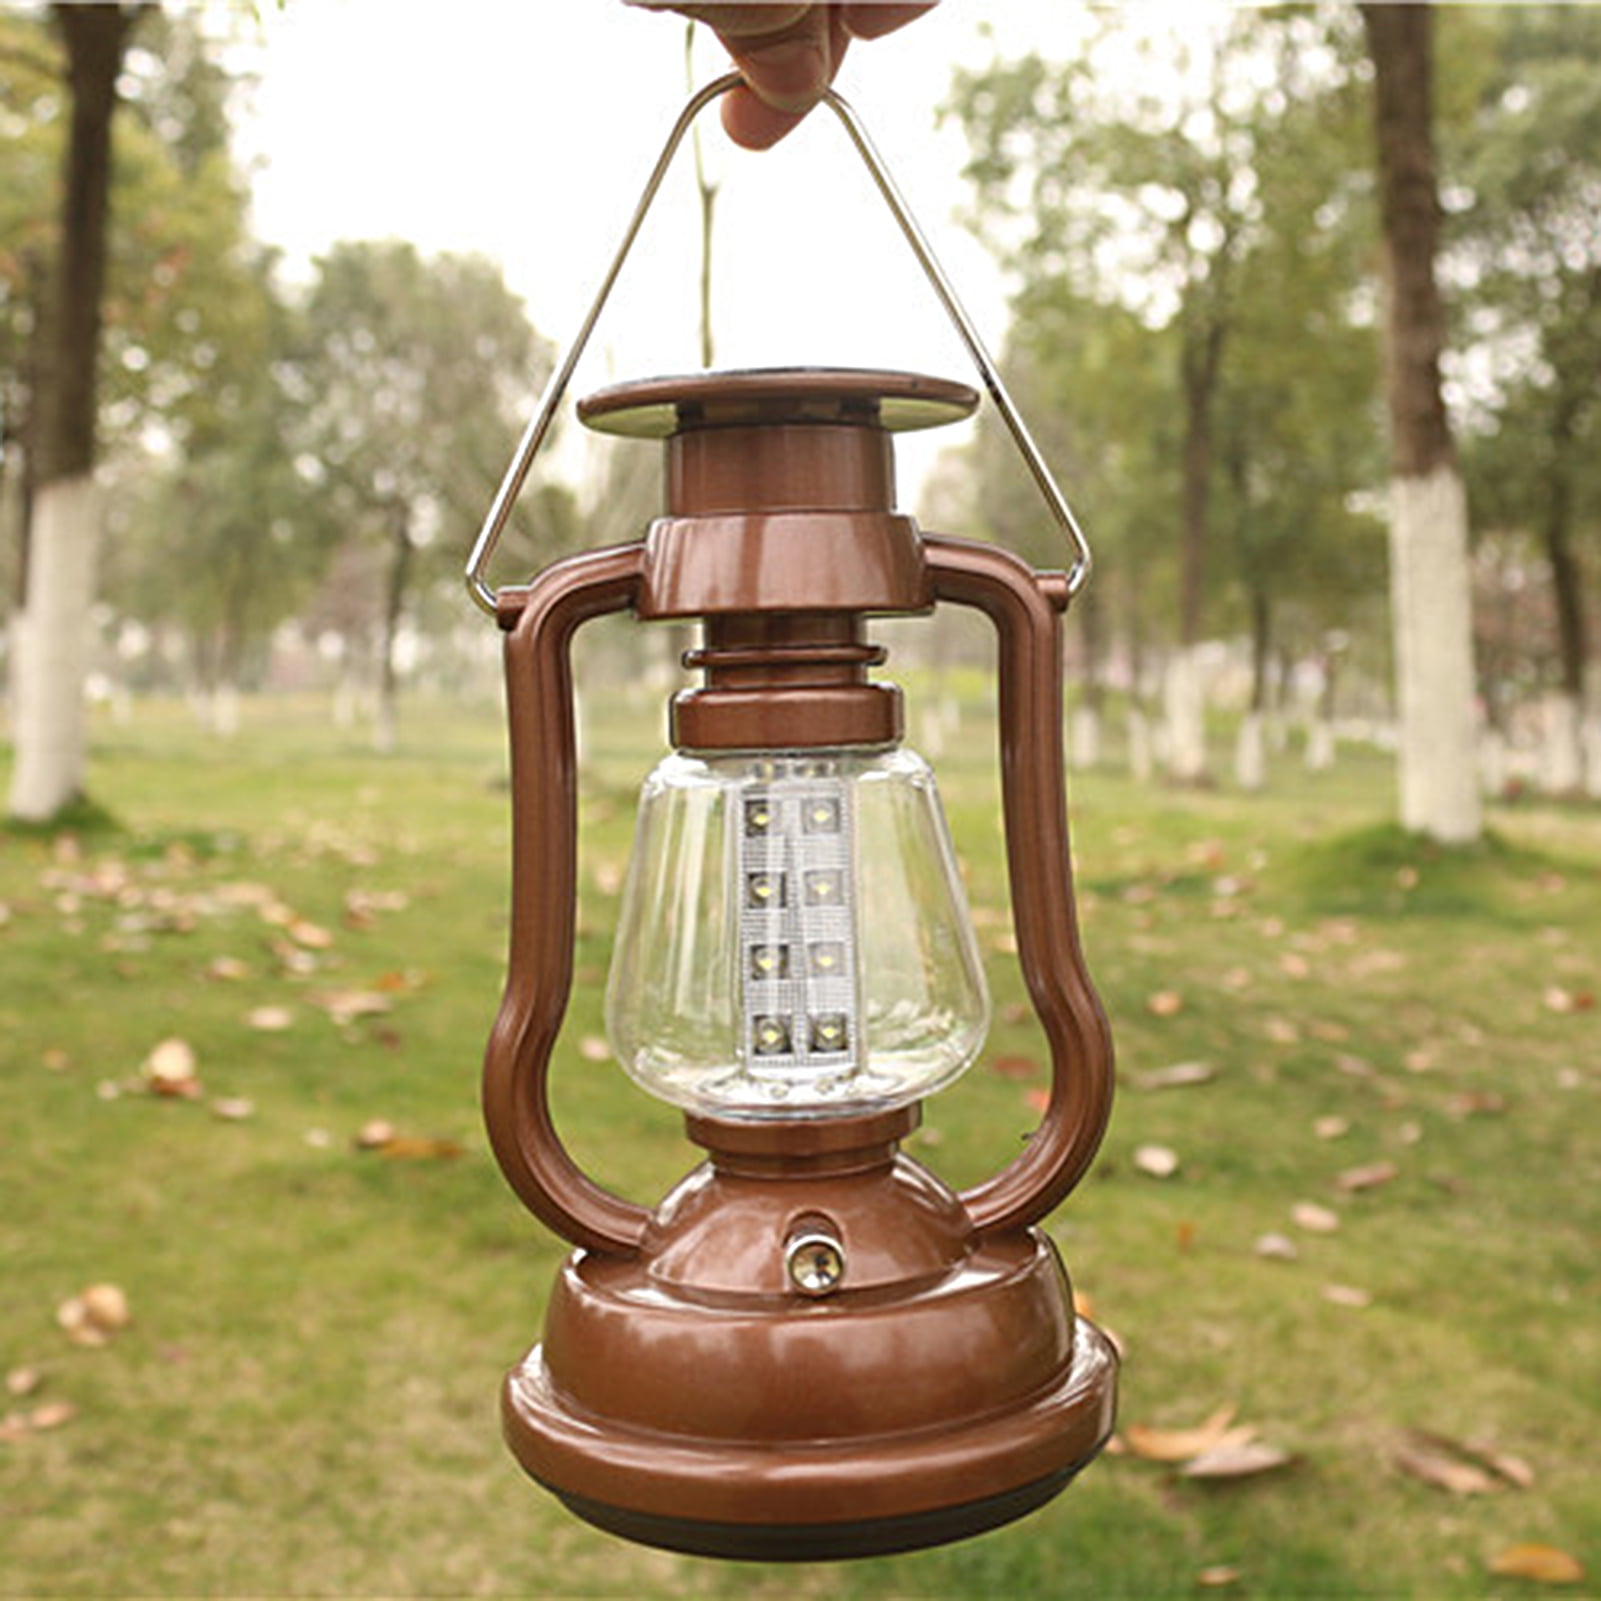 UniqueFire Retro Camping Lantern Rechargeable 1500LM 2 Modes  Dimmable,Portable Electric Hurricane Lamp Hands-Free Flashlight,5000 mA  High Capacity